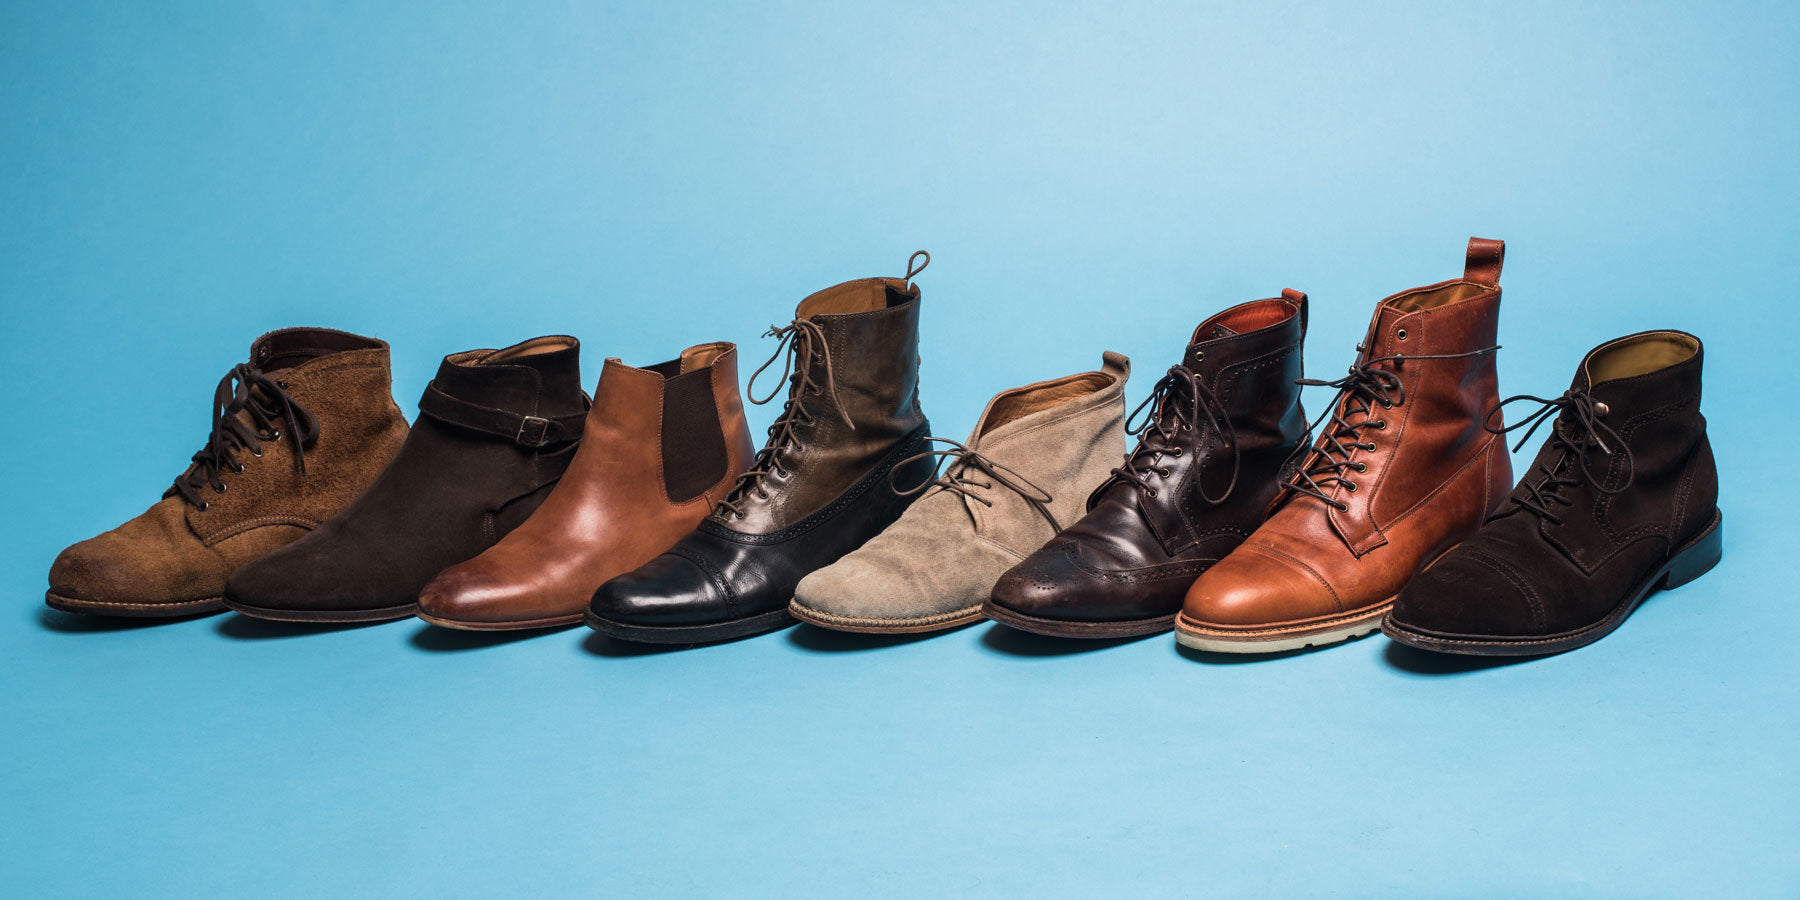 Articles of Style | A Guide to Boots